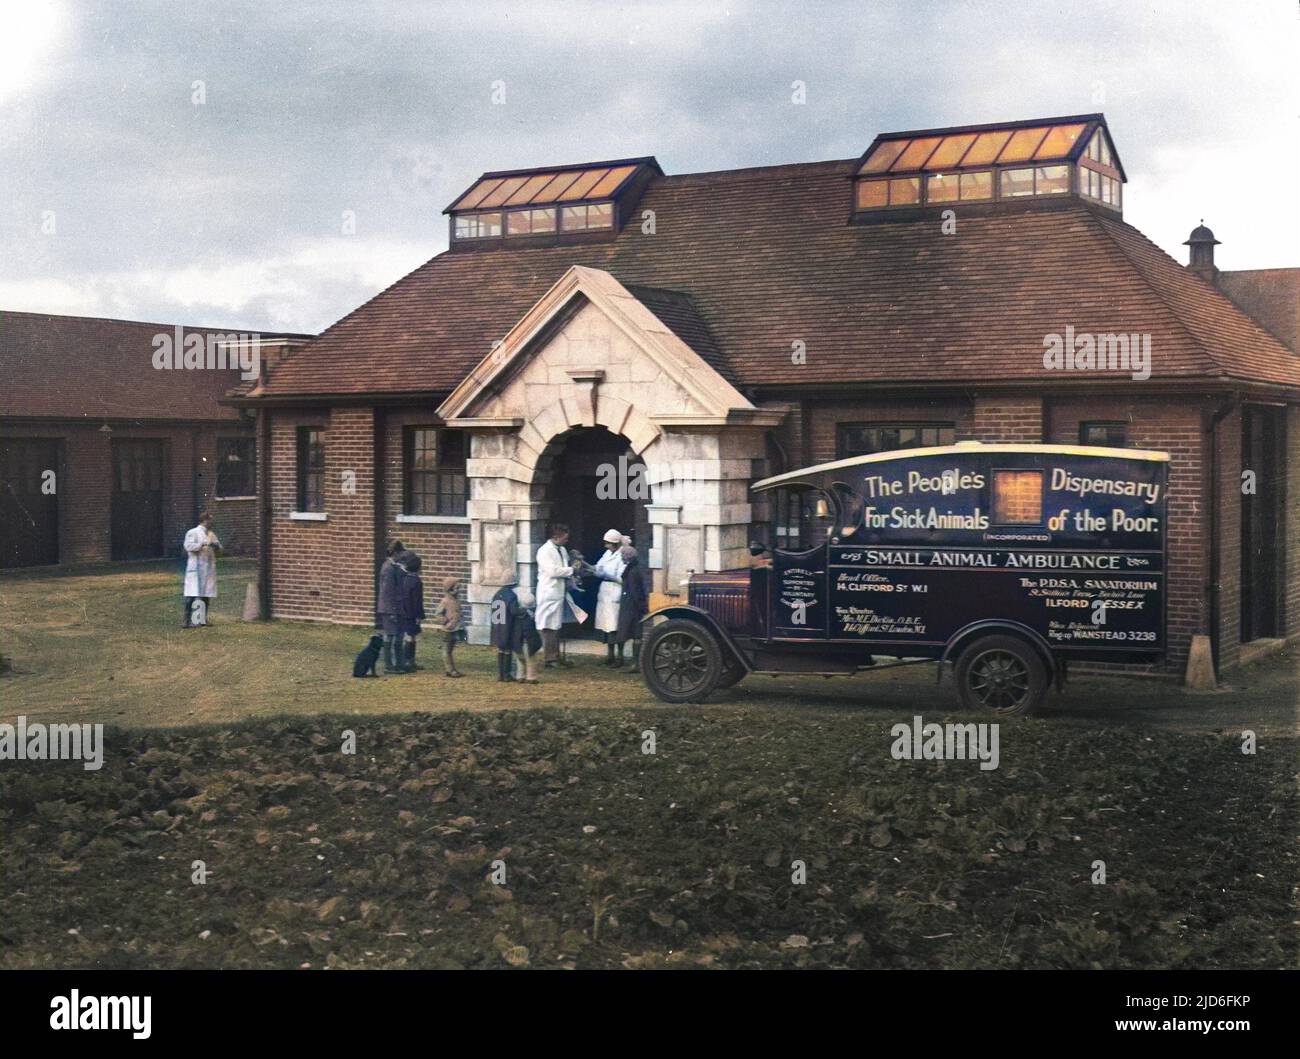 The Small Animal Ambulance of the People's Dispensary for Sick Animals (P.D.S.A.) arrives outide the Sanitorium in Ilford, Essex, England. Colourised version of : 10167302       Date: early 1930s Stock Photo